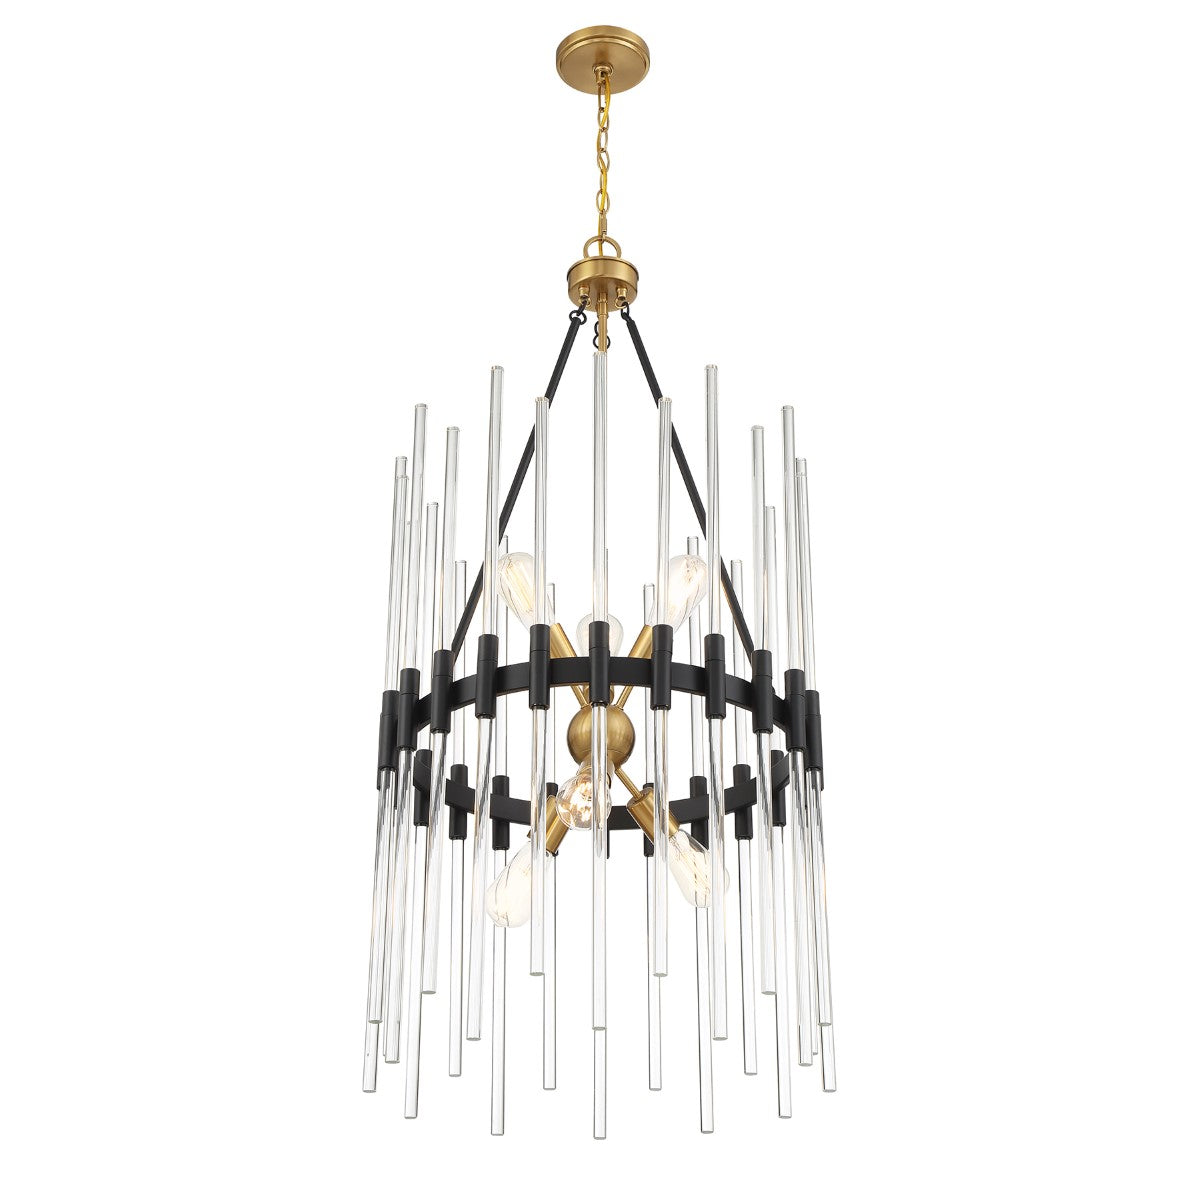 Santiago 20 in. 6 Lights Pendant Light Matte Black with Warm Brass Accents Finish - Bees Lighting